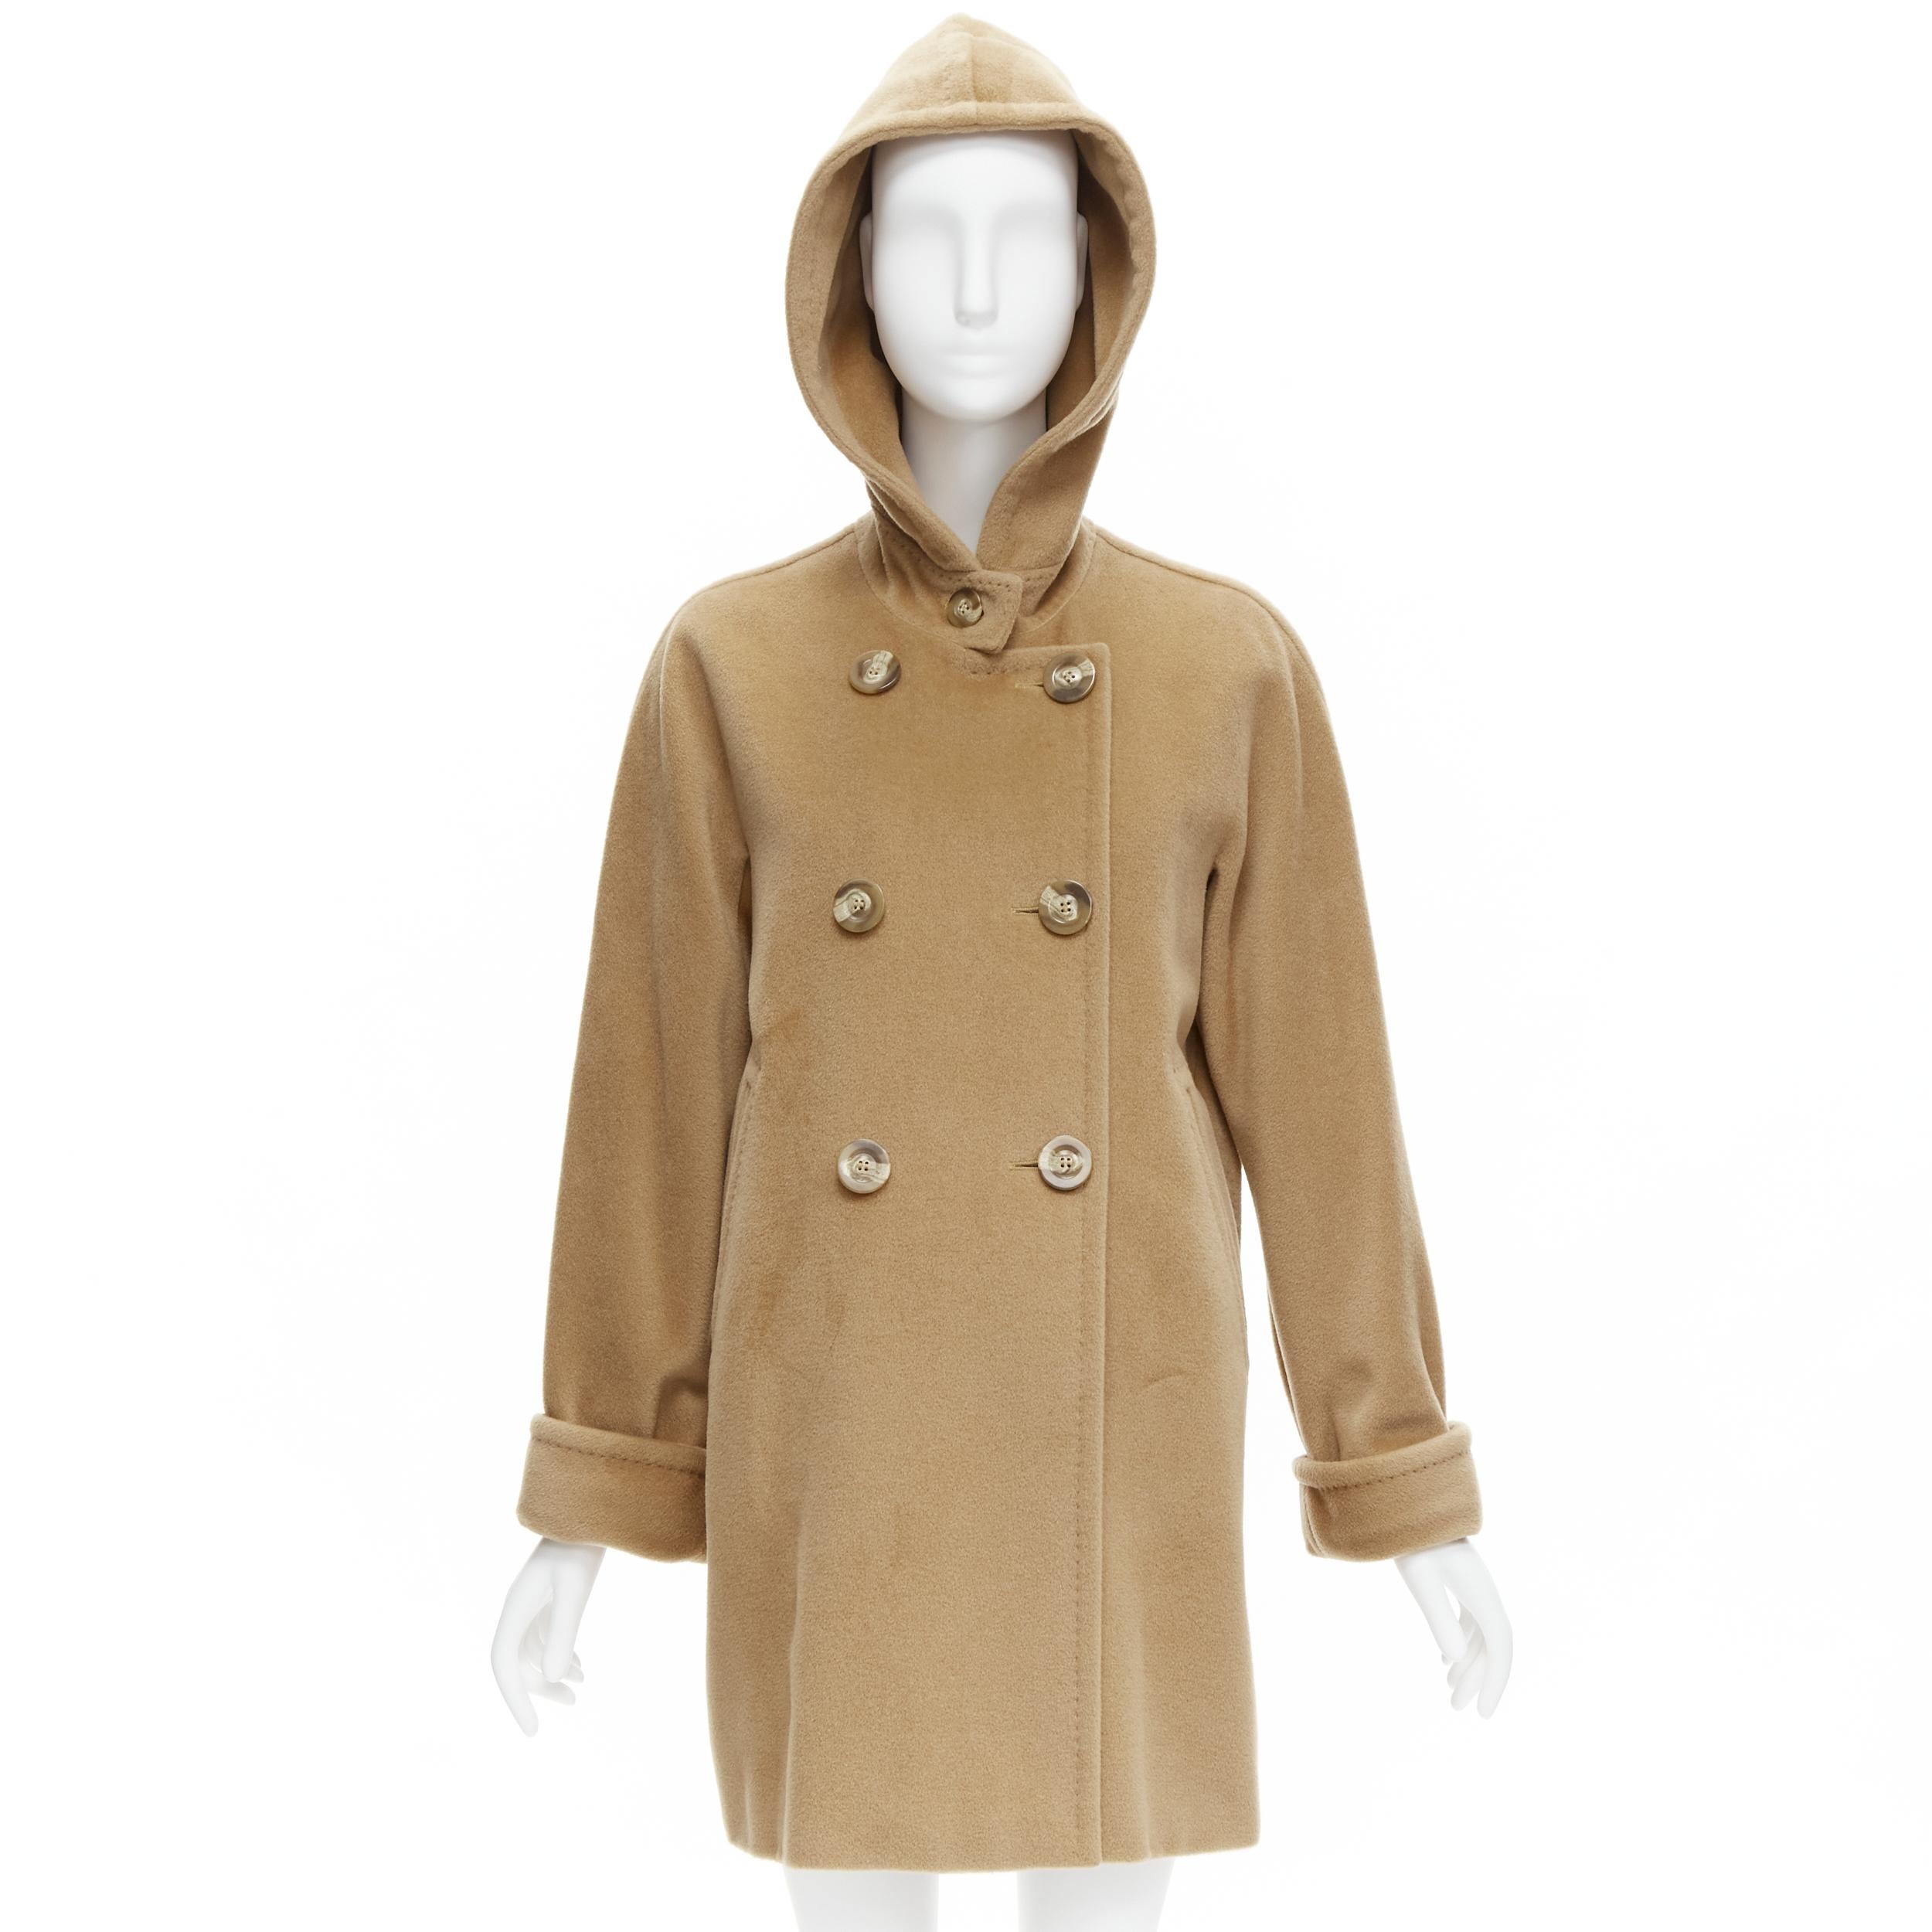 MAX MARA tan wool cashmere double breasted hooded cuffed sleeve coat IT38 S
Reference: TGAS/C02029
Brand: Max Mara
Material: Virgin Wool, Cashmere
Color: Tan Brown
Pattern: Solid
Closure: Button
Lining: Beige Fabric
Made in: